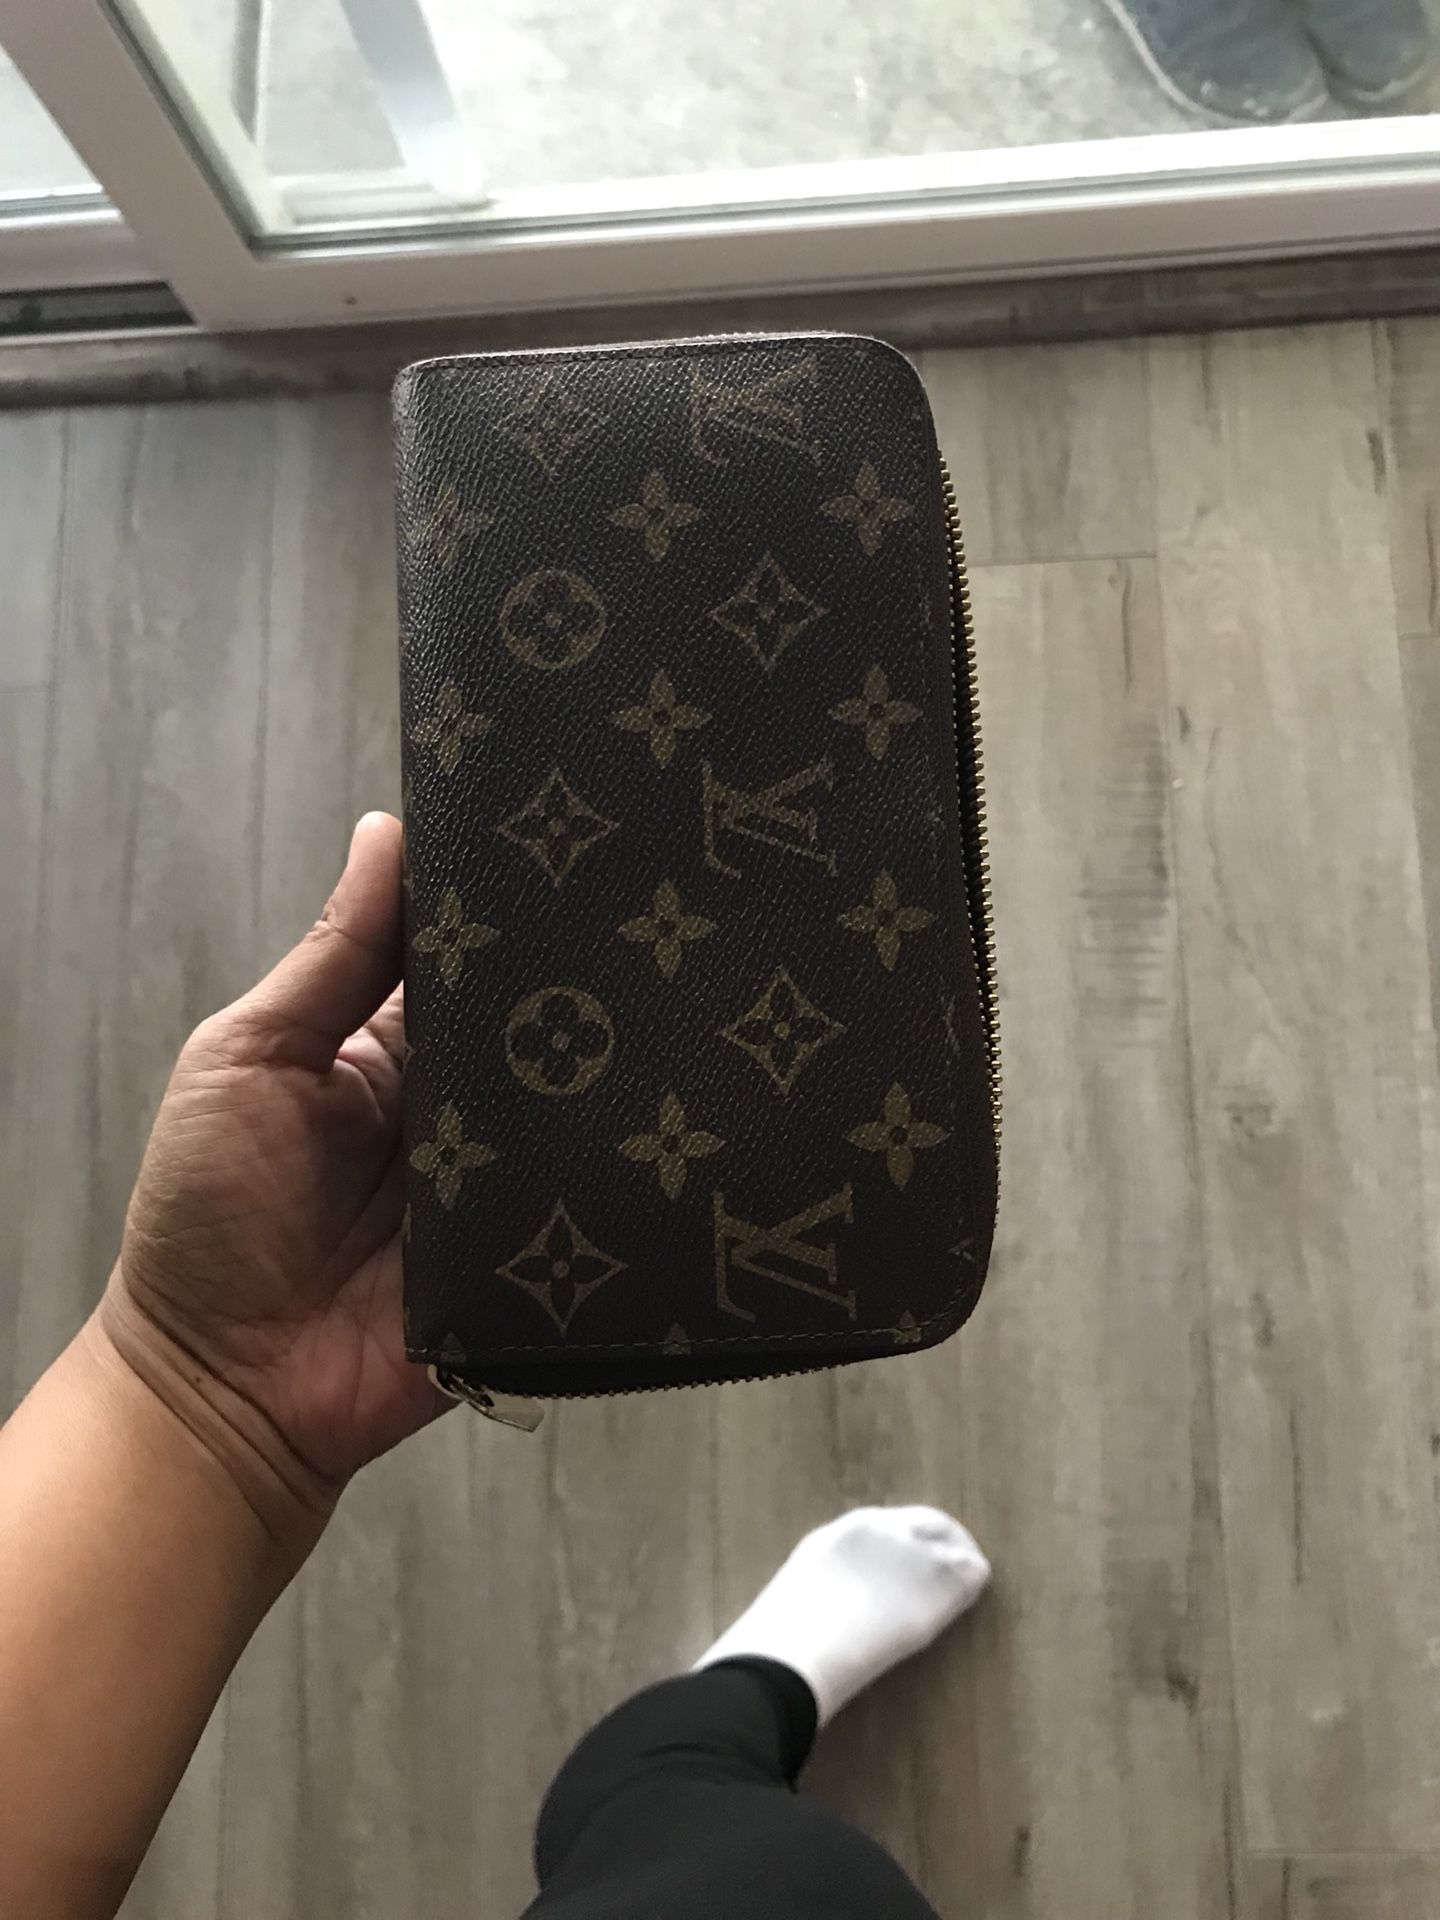 Louis Vuitton Speedy 30 and wallet. for Sale in San Jose, CA - OfferUp